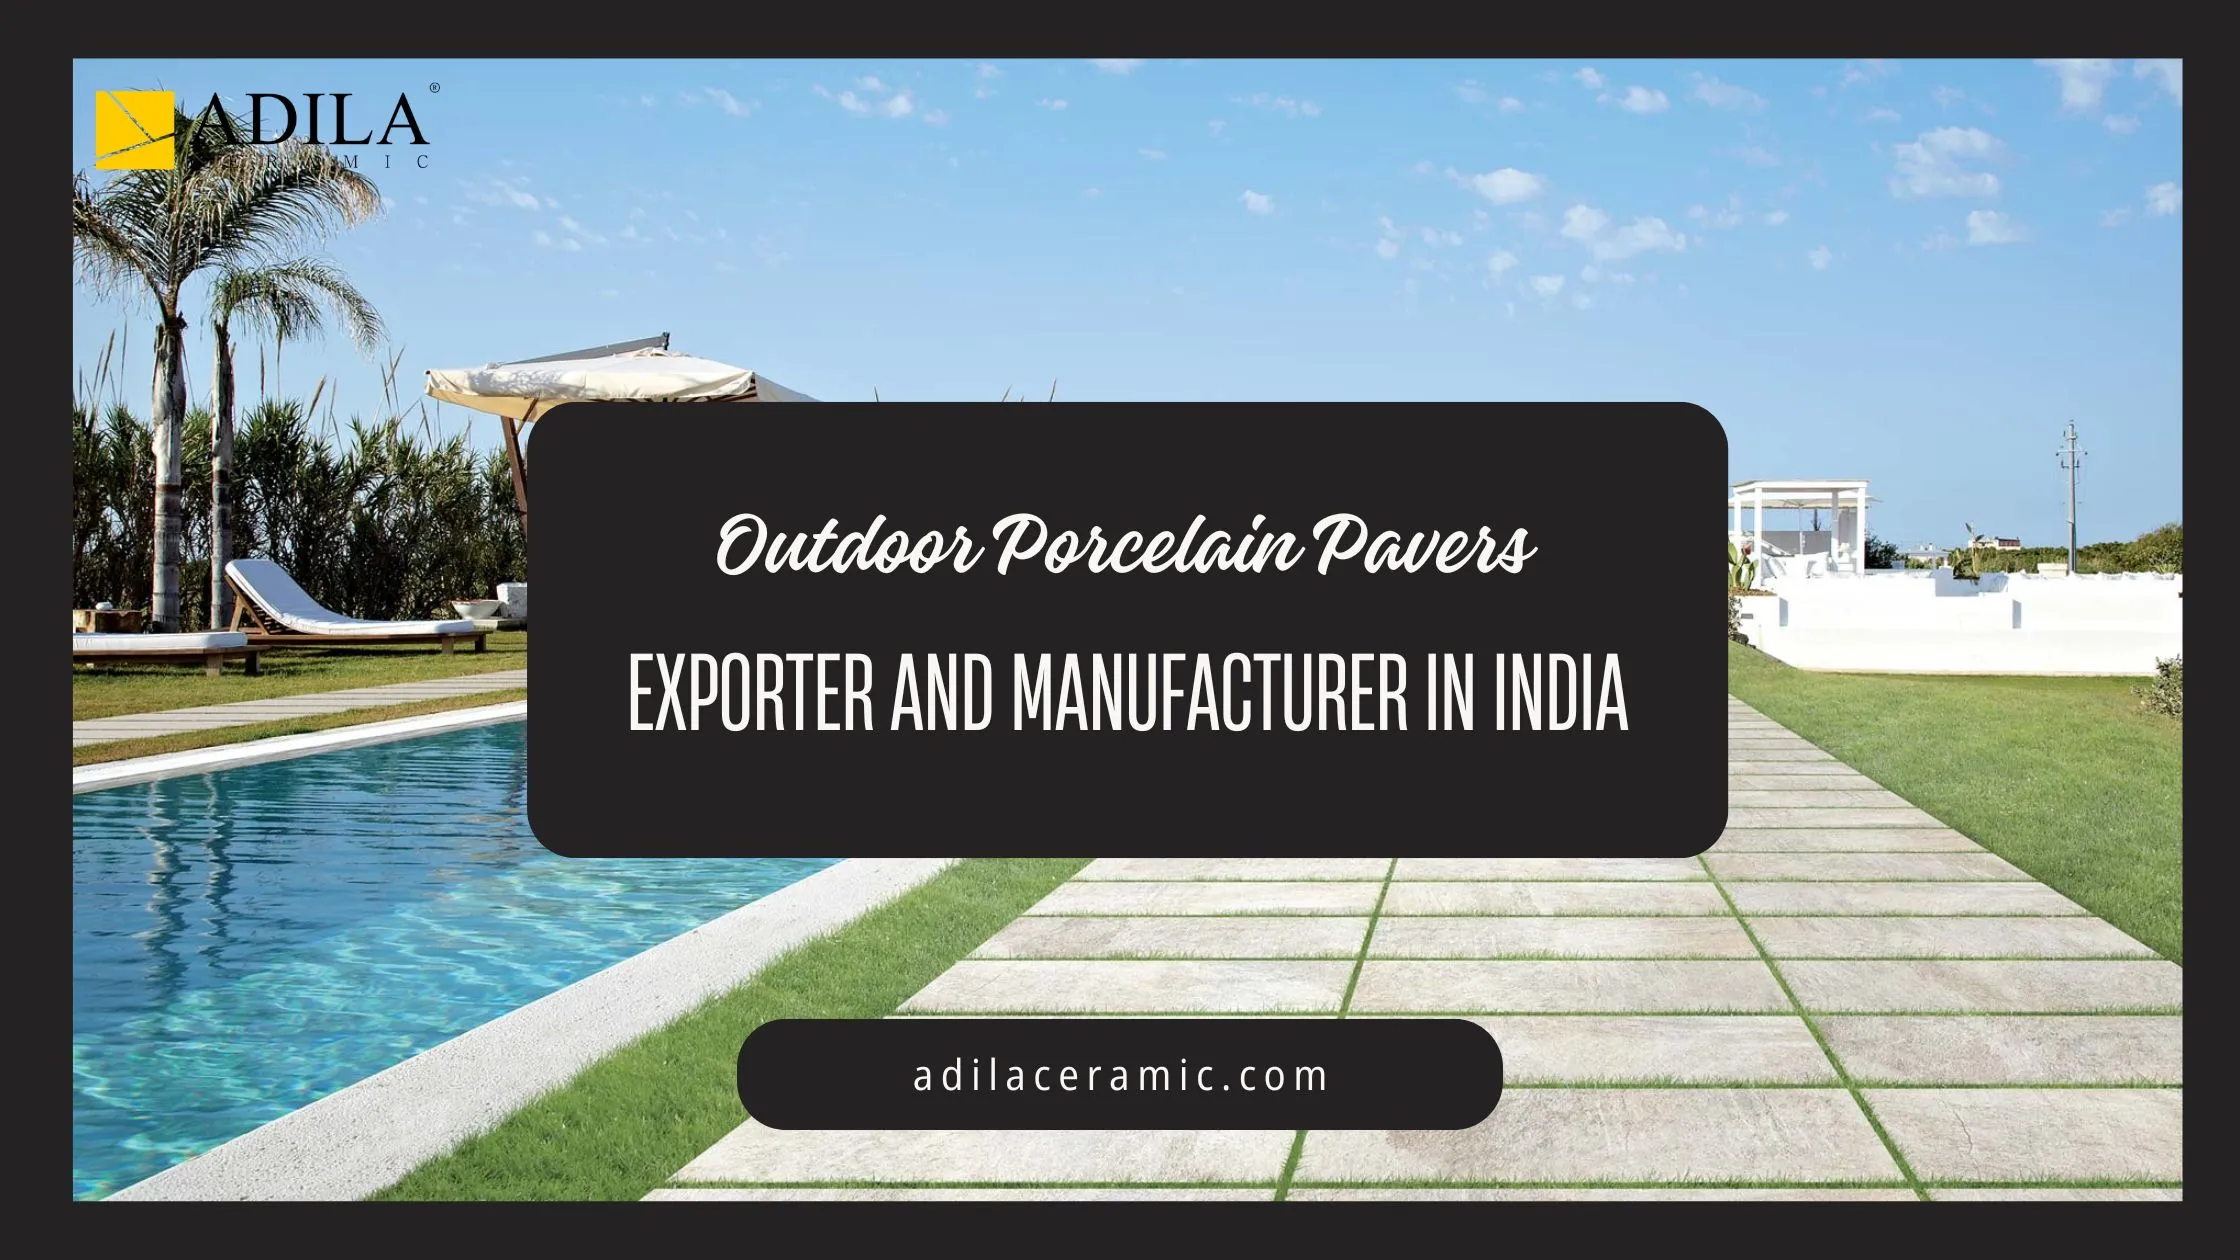 Outdoor Porcelain Pavers Exporter and Manufacturer in India